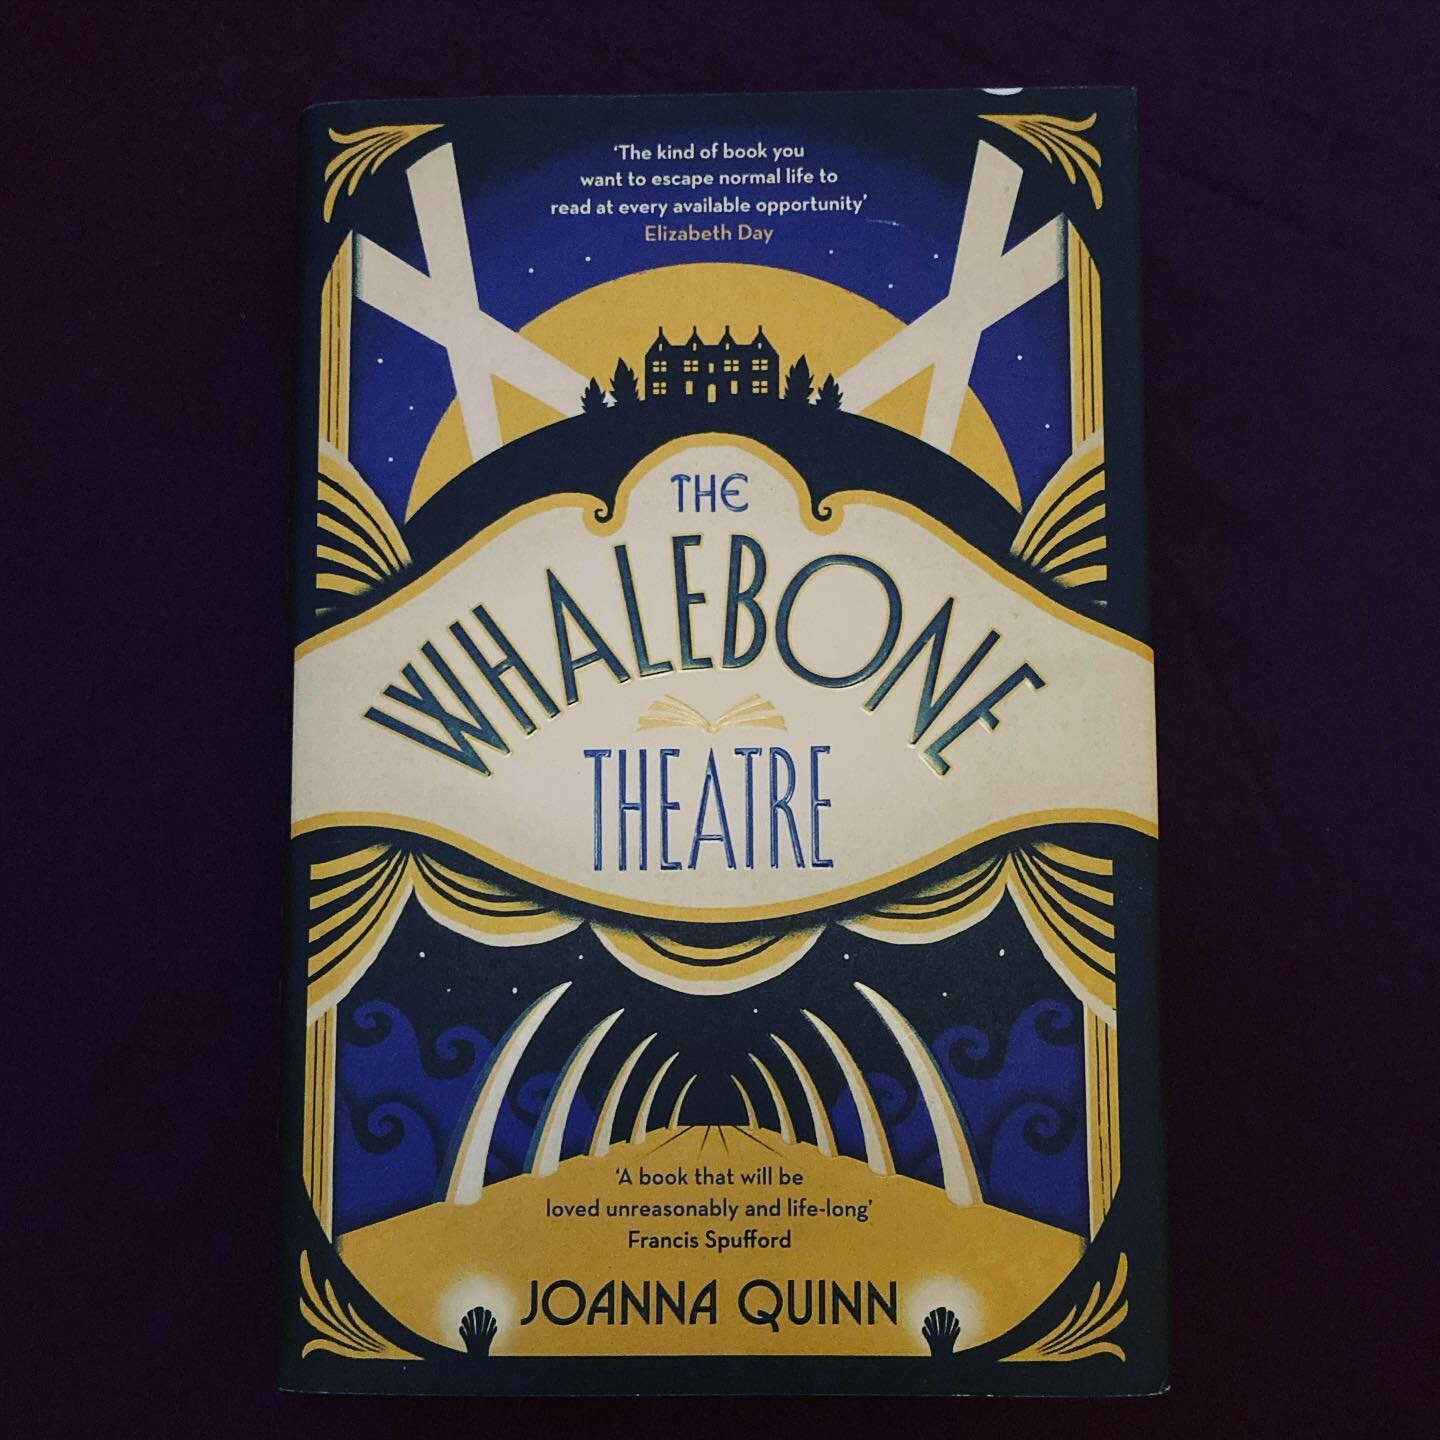 Christmas round one done with this beauty given to someone who will love it

#thewhalebonetheatre #joannaquinn